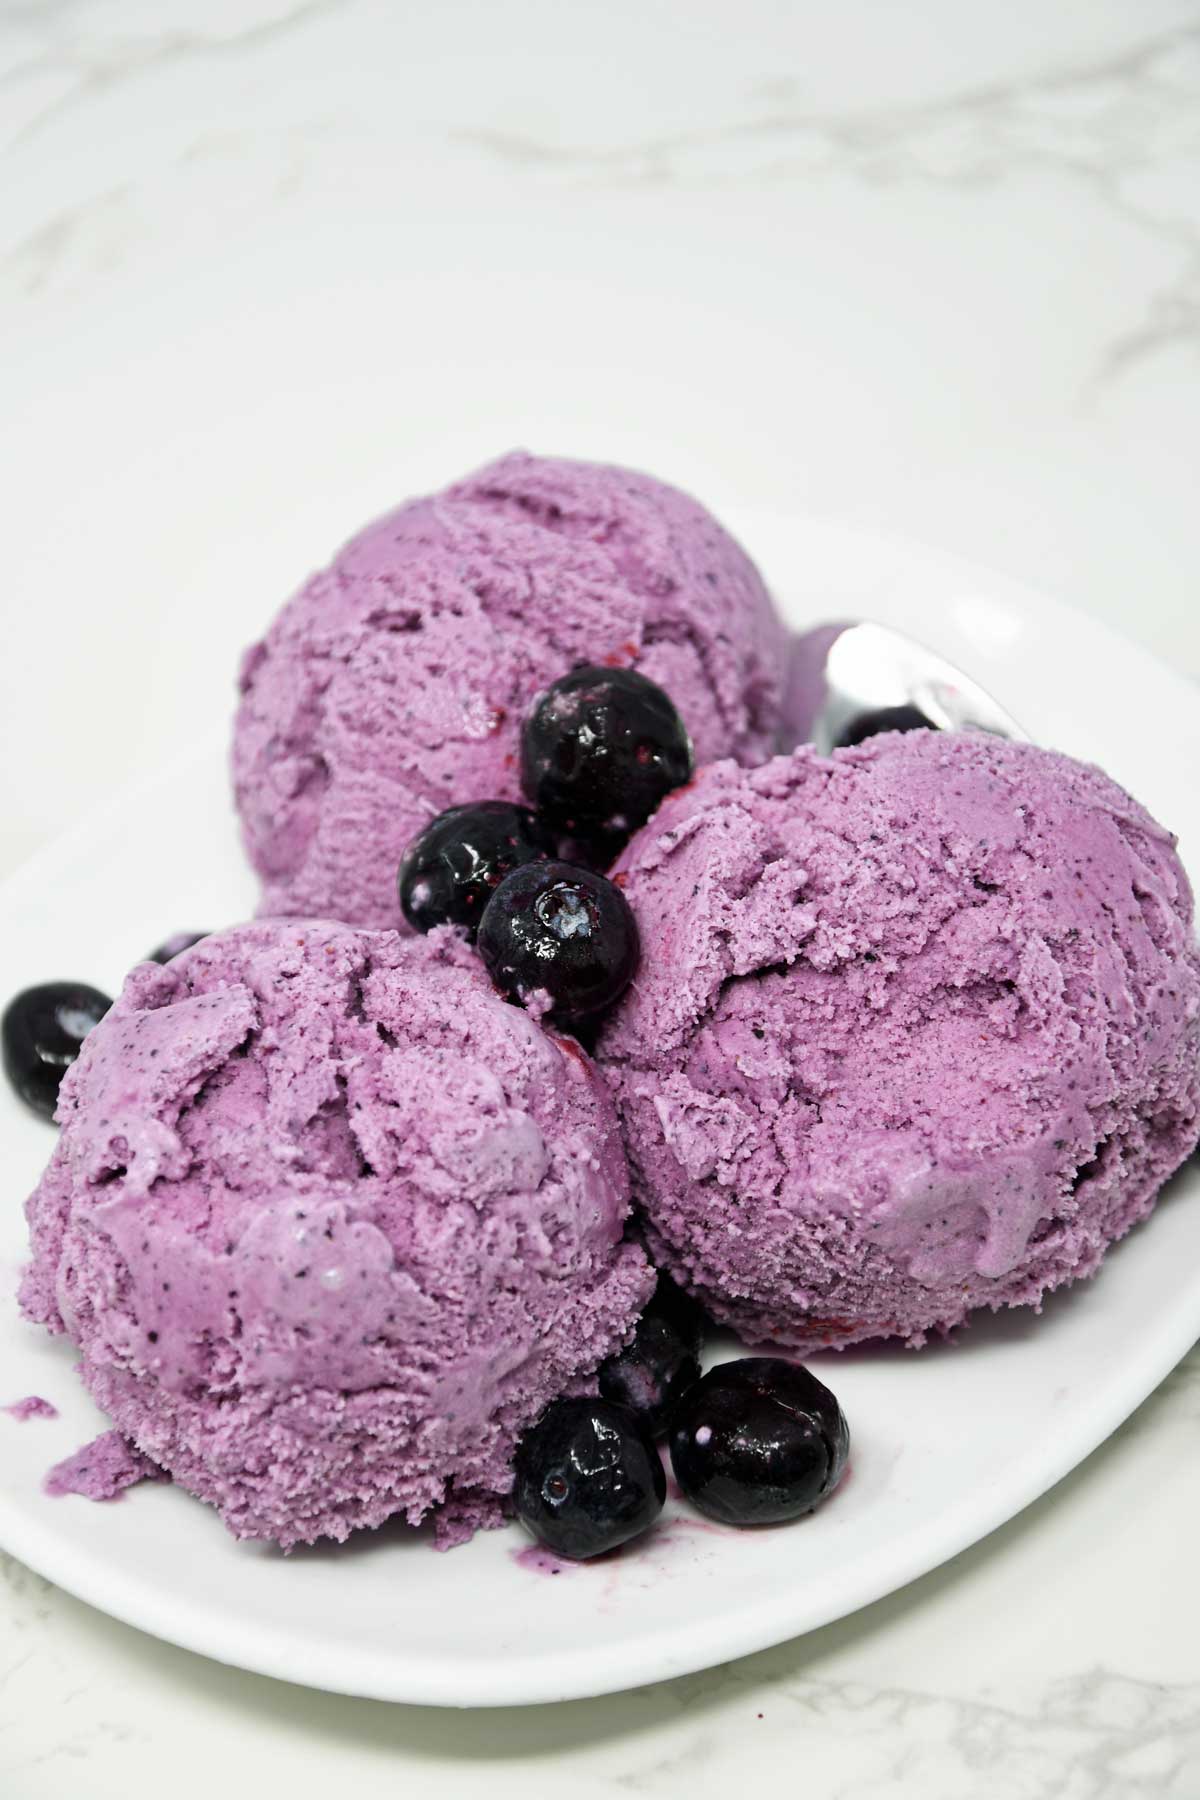 Scoops of blueberry ice cream in a plate.